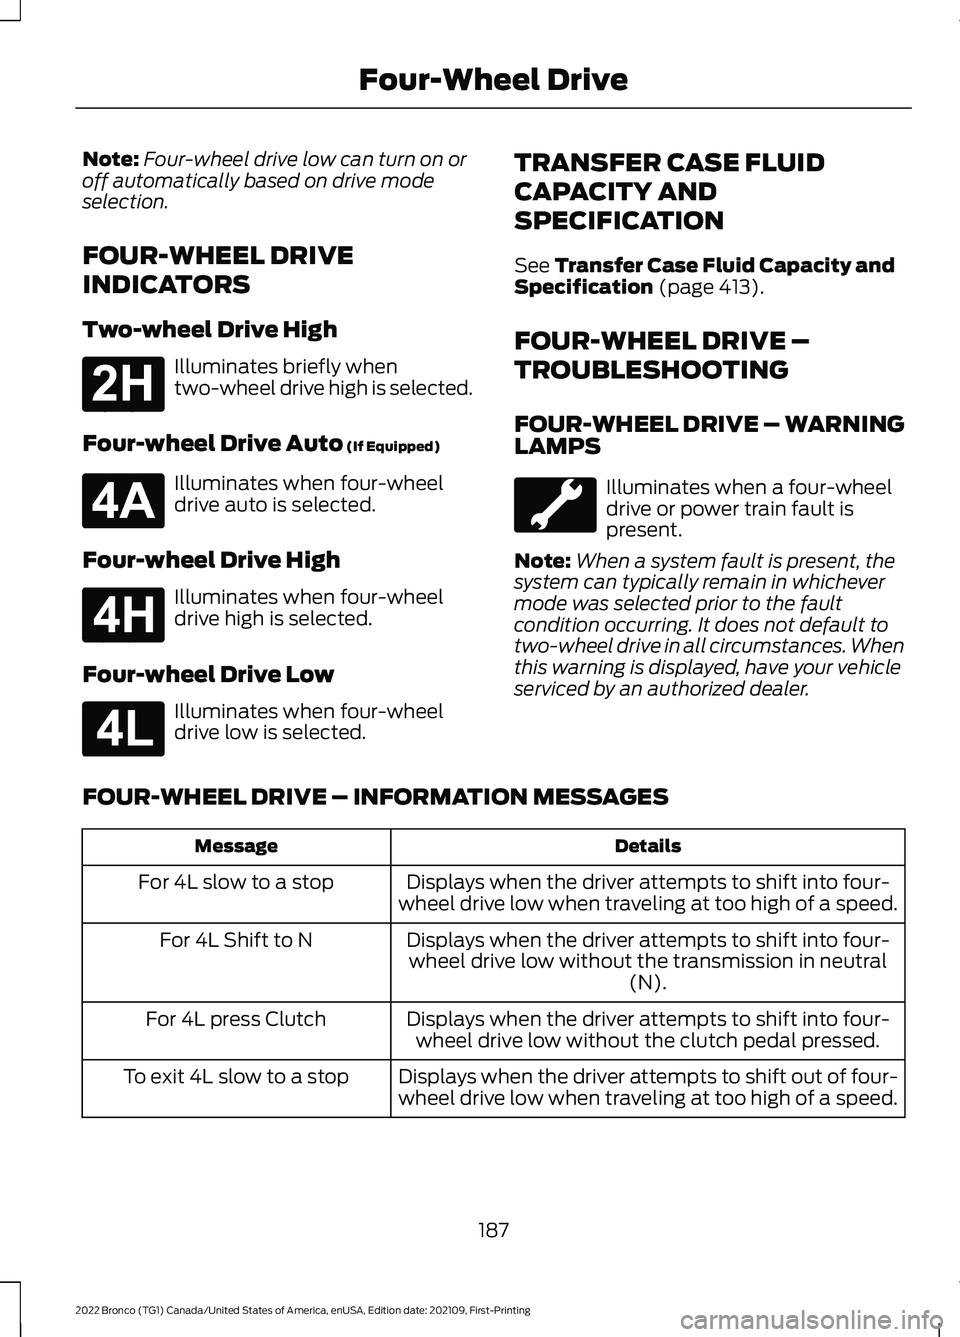 FORD BRONCO 2022 User Guide Note:Four-wheel drive low can turn on oroff automatically based on drive modeselection.
FOUR-WHEEL DRIVE
INDICATORS
Two-wheel Drive High
Illuminates briefly whentwo-wheel drive high is selected.
Four-